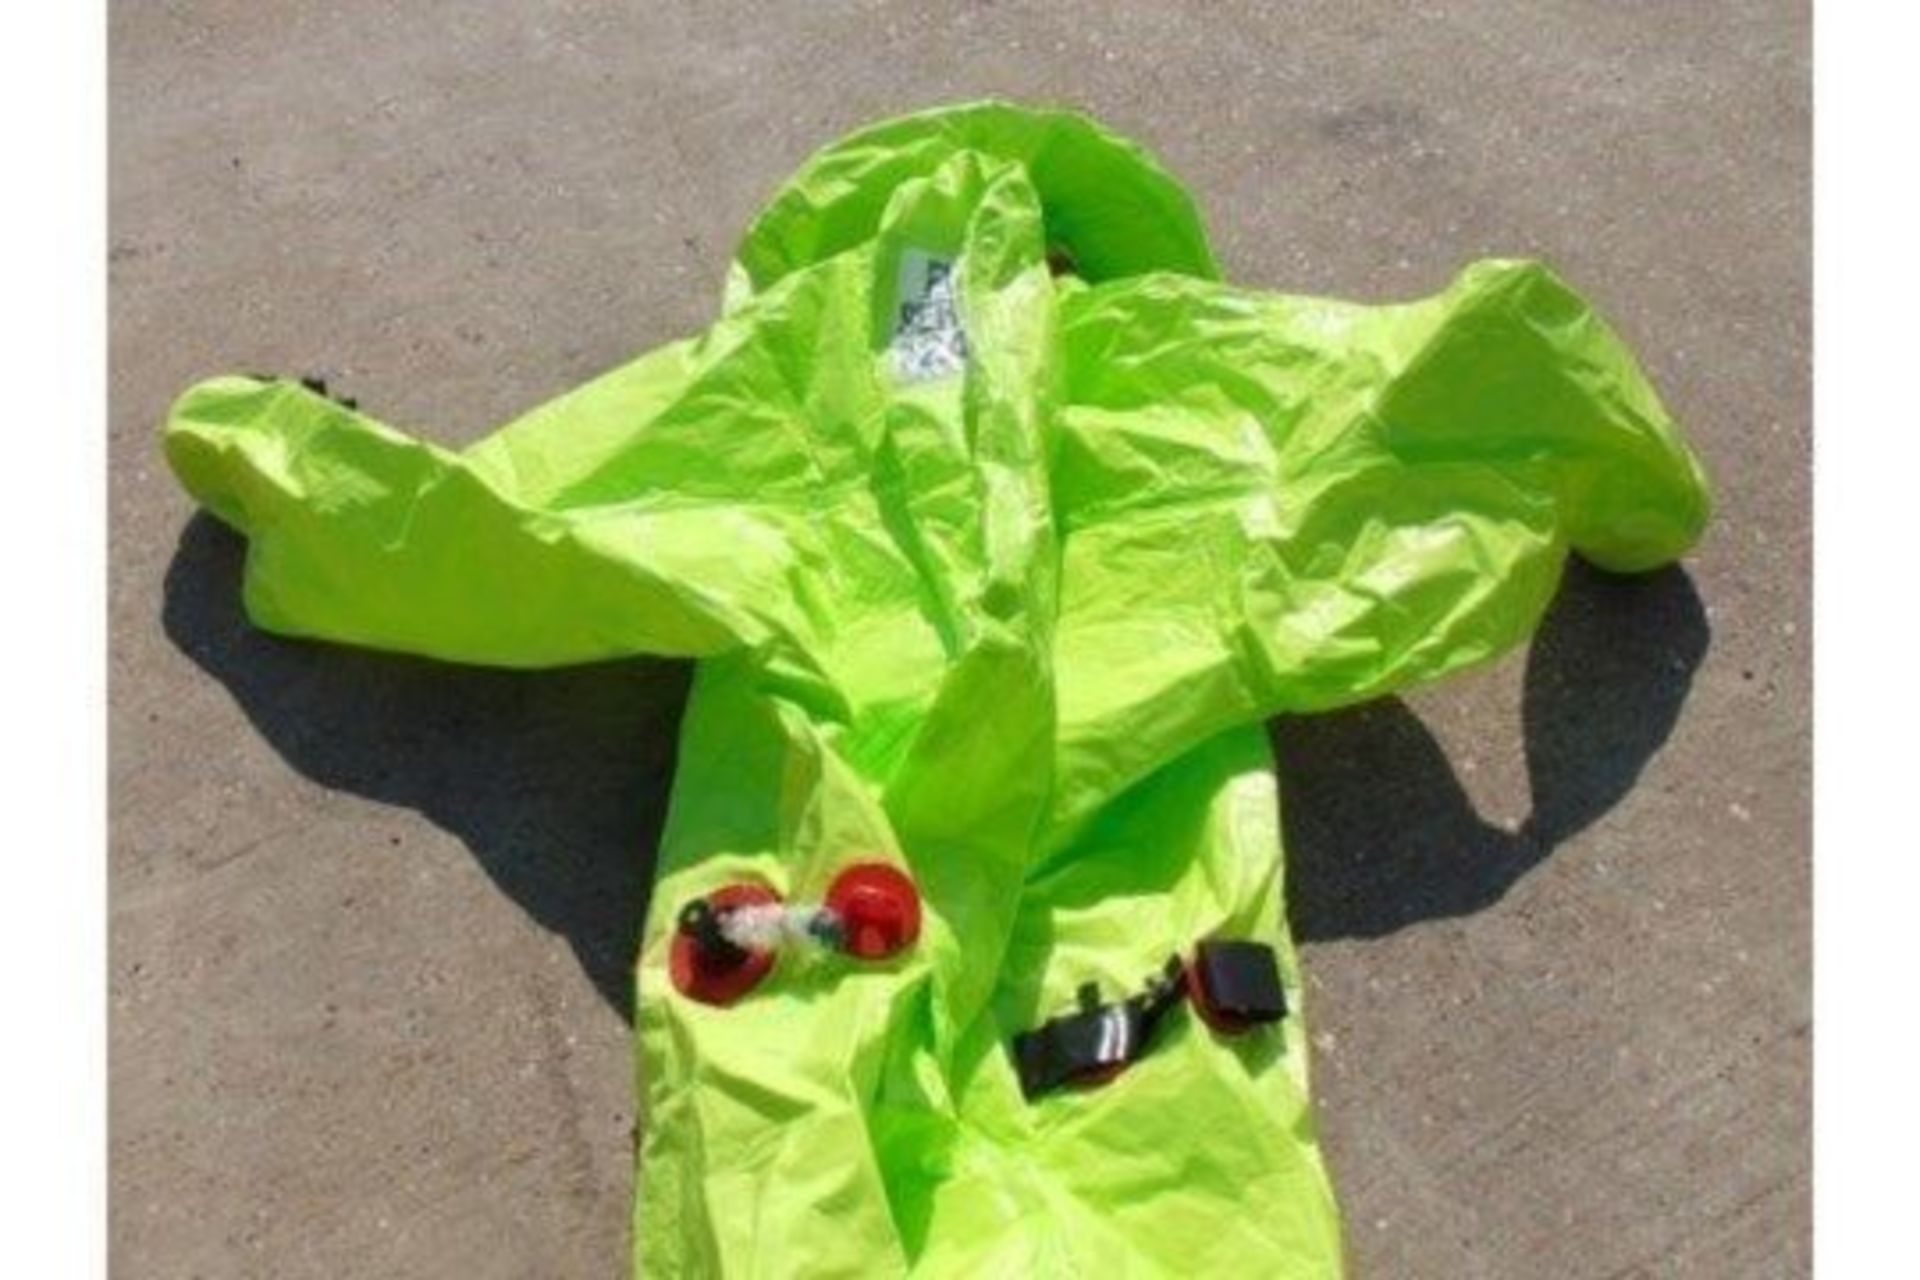 10 x Respirex Tychem TK Gas-Tight Hazmat Suit Type 1A with Attached Boots and Gloves. - Image 5 of 10